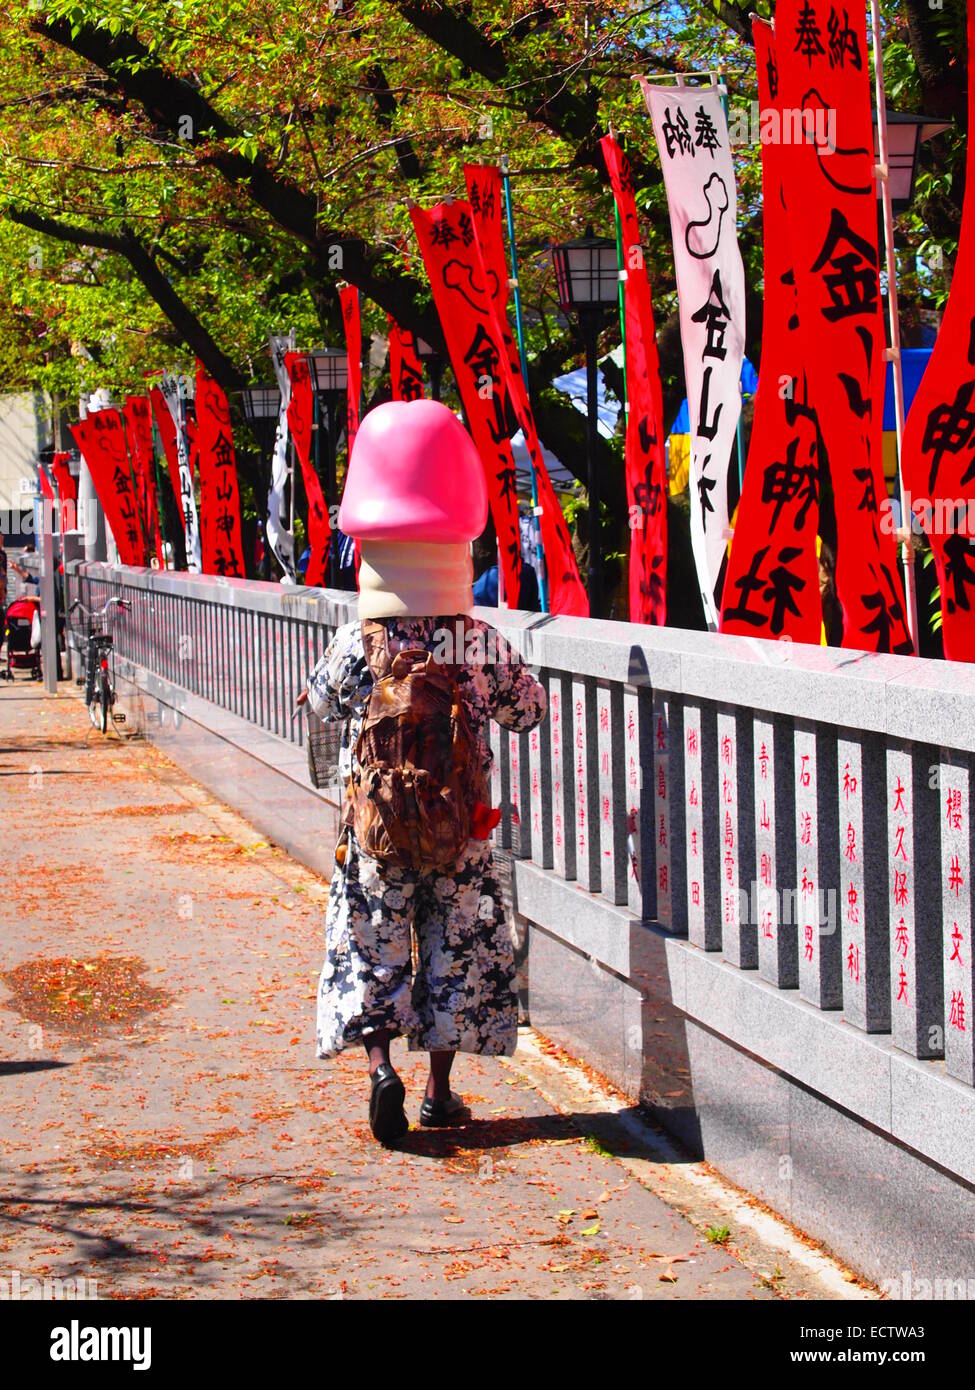 This image of a Japanese Fertility Festival was captured in Kawasaki